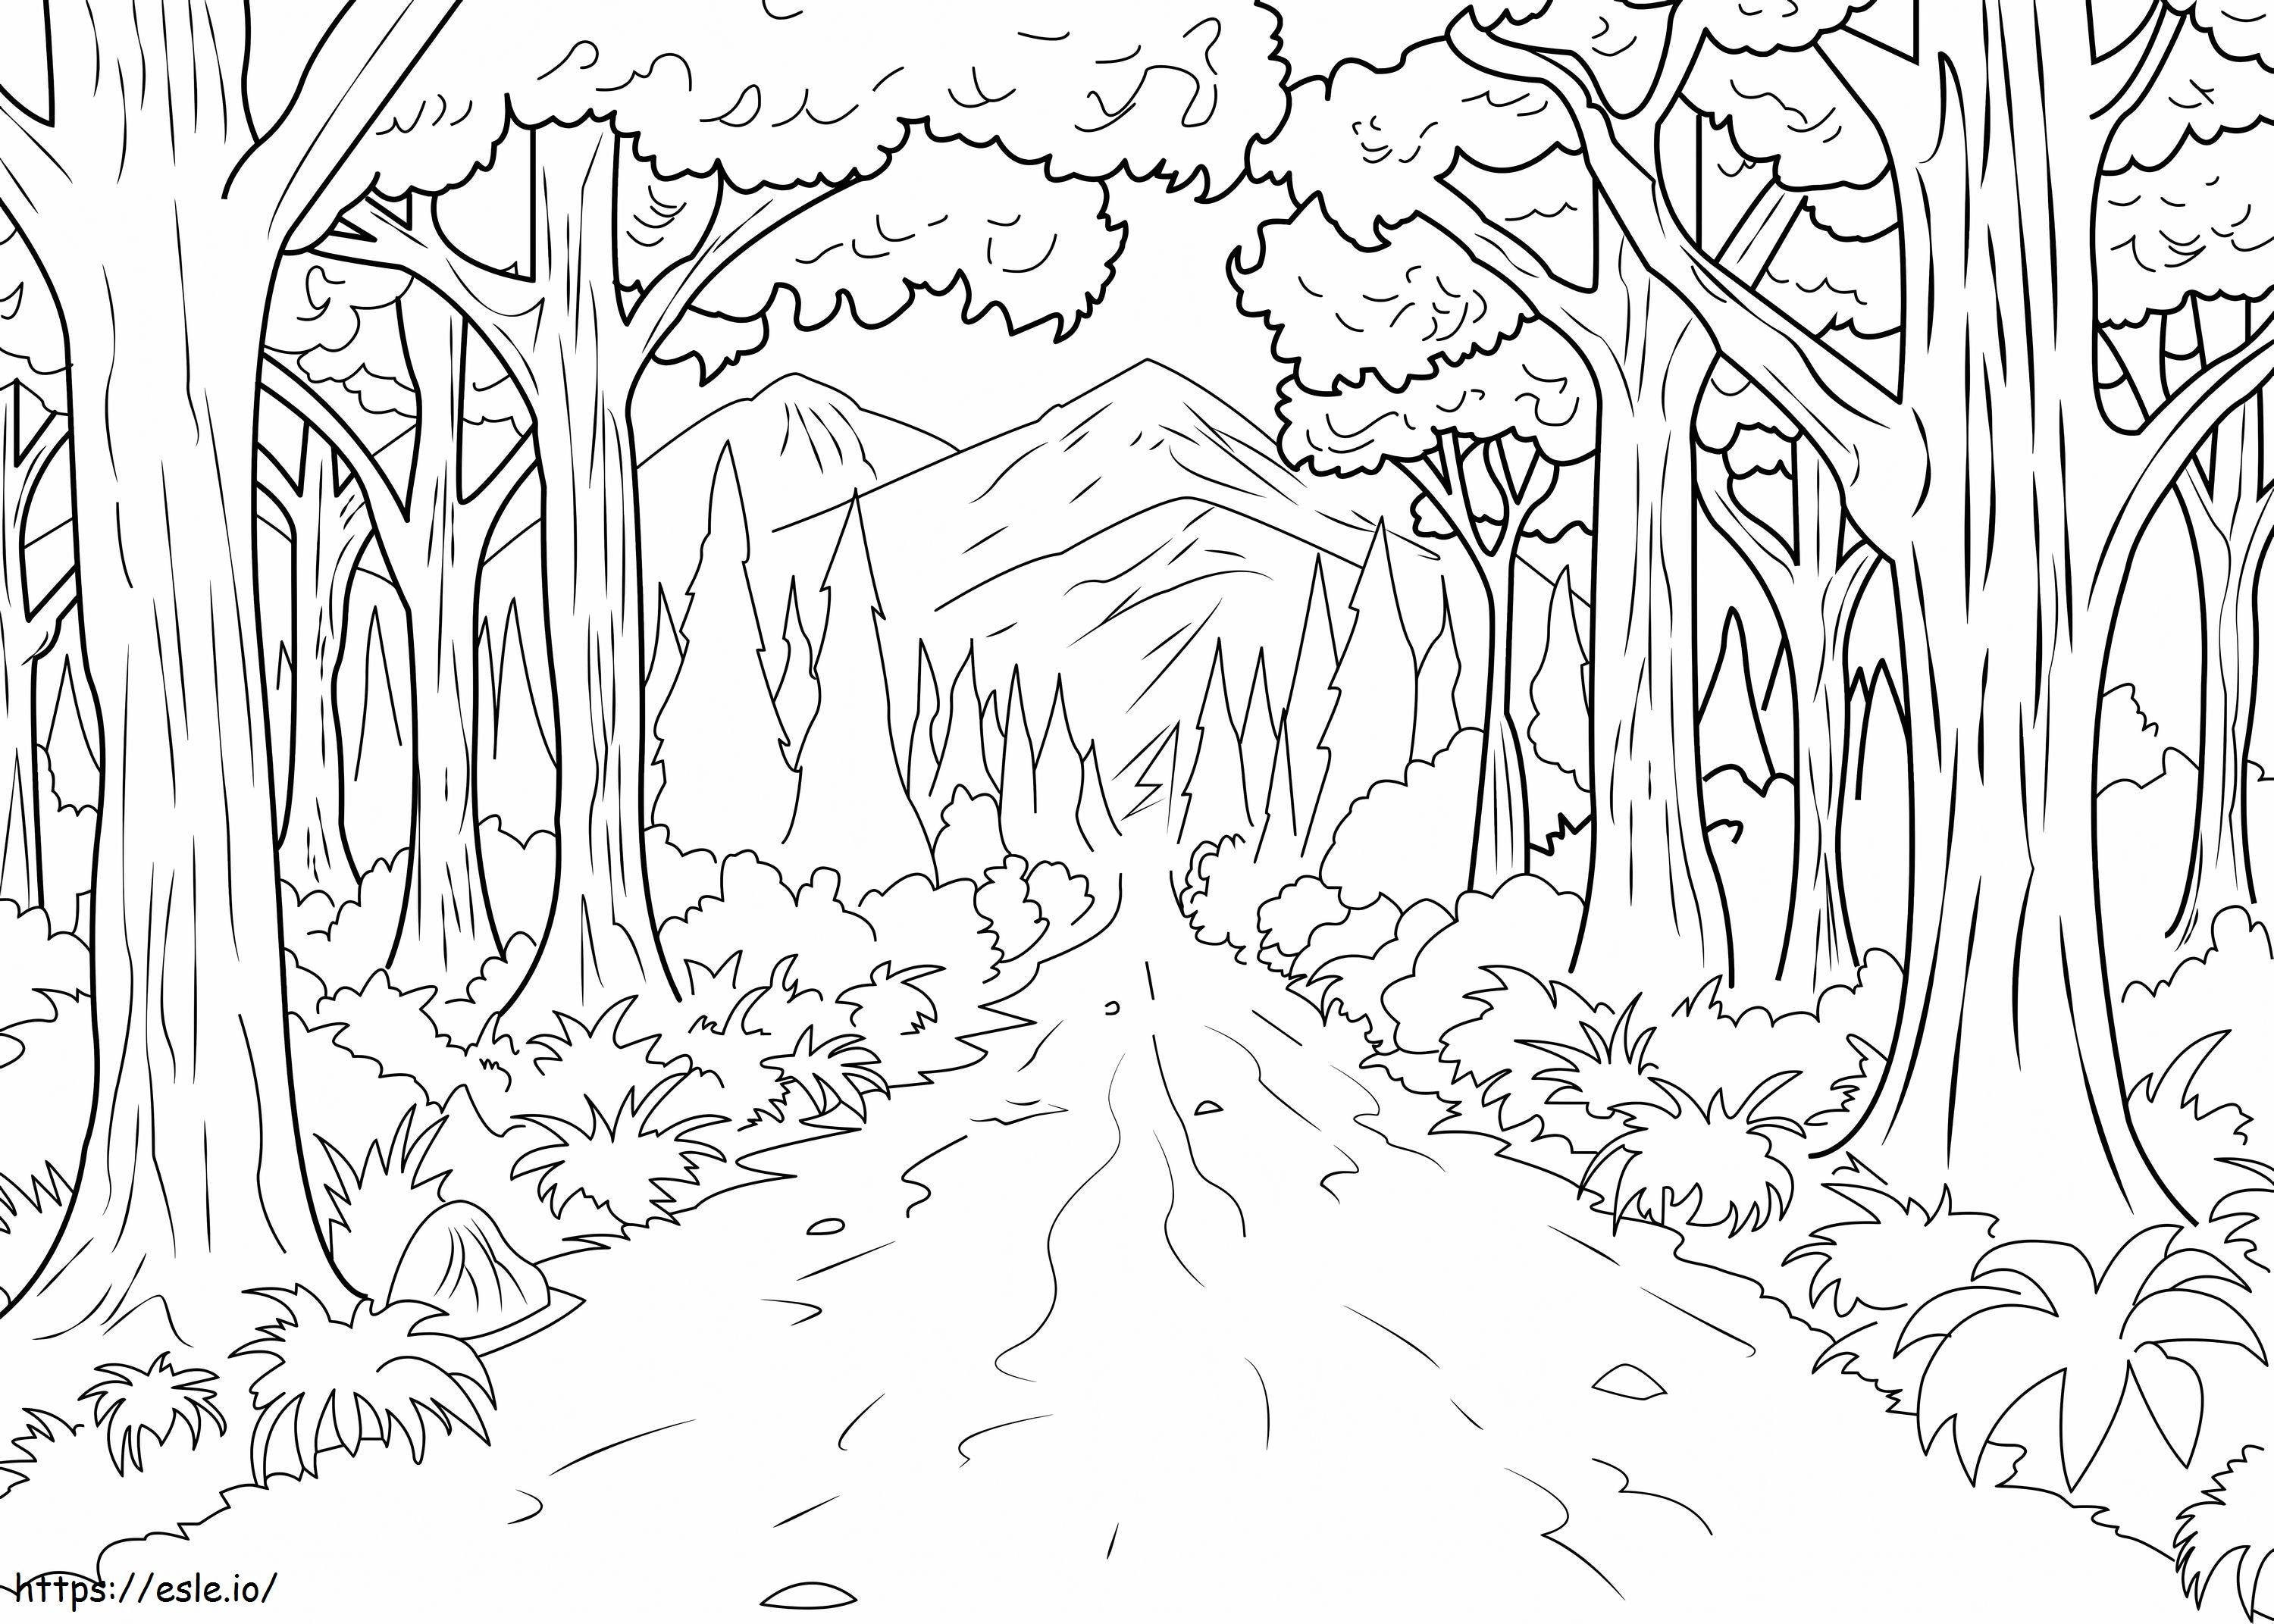 Happy Human In The Jungle coloring page